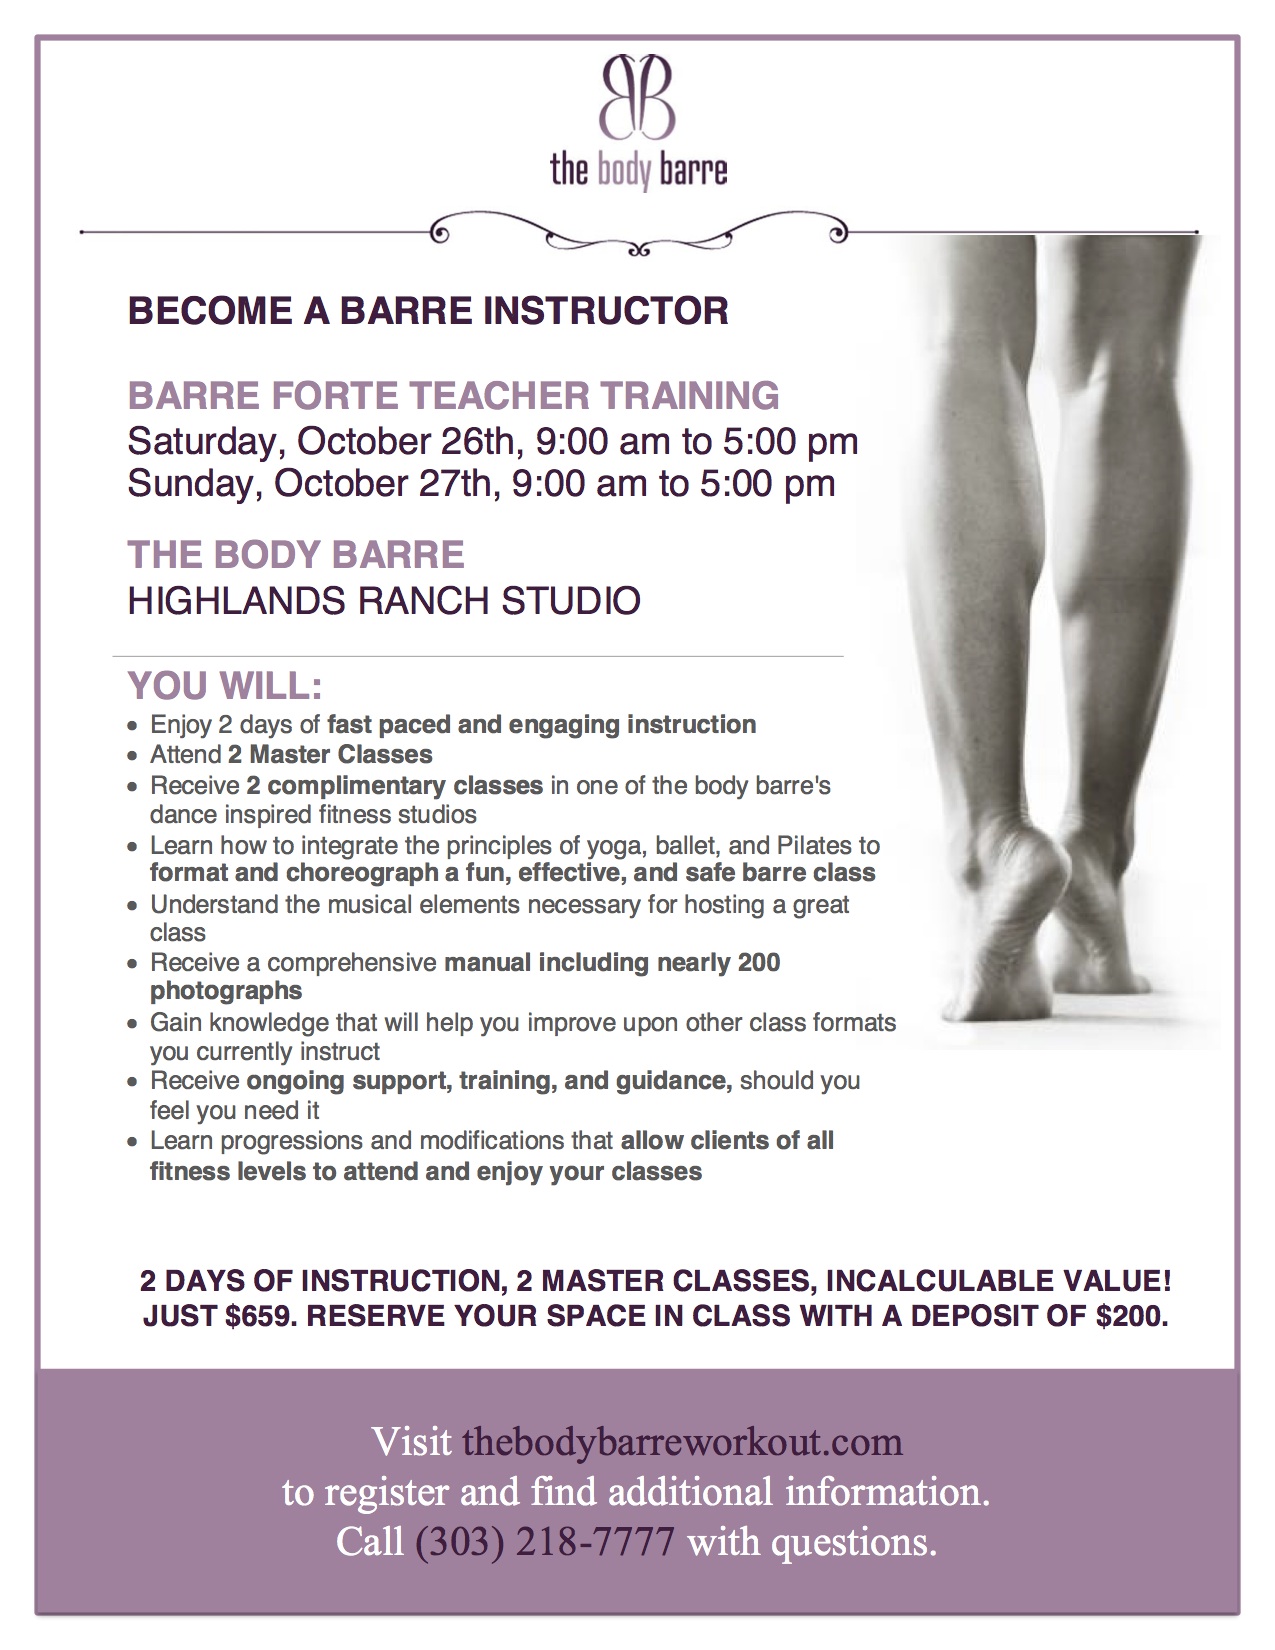 Barre Training to Instruct Body Barre Class